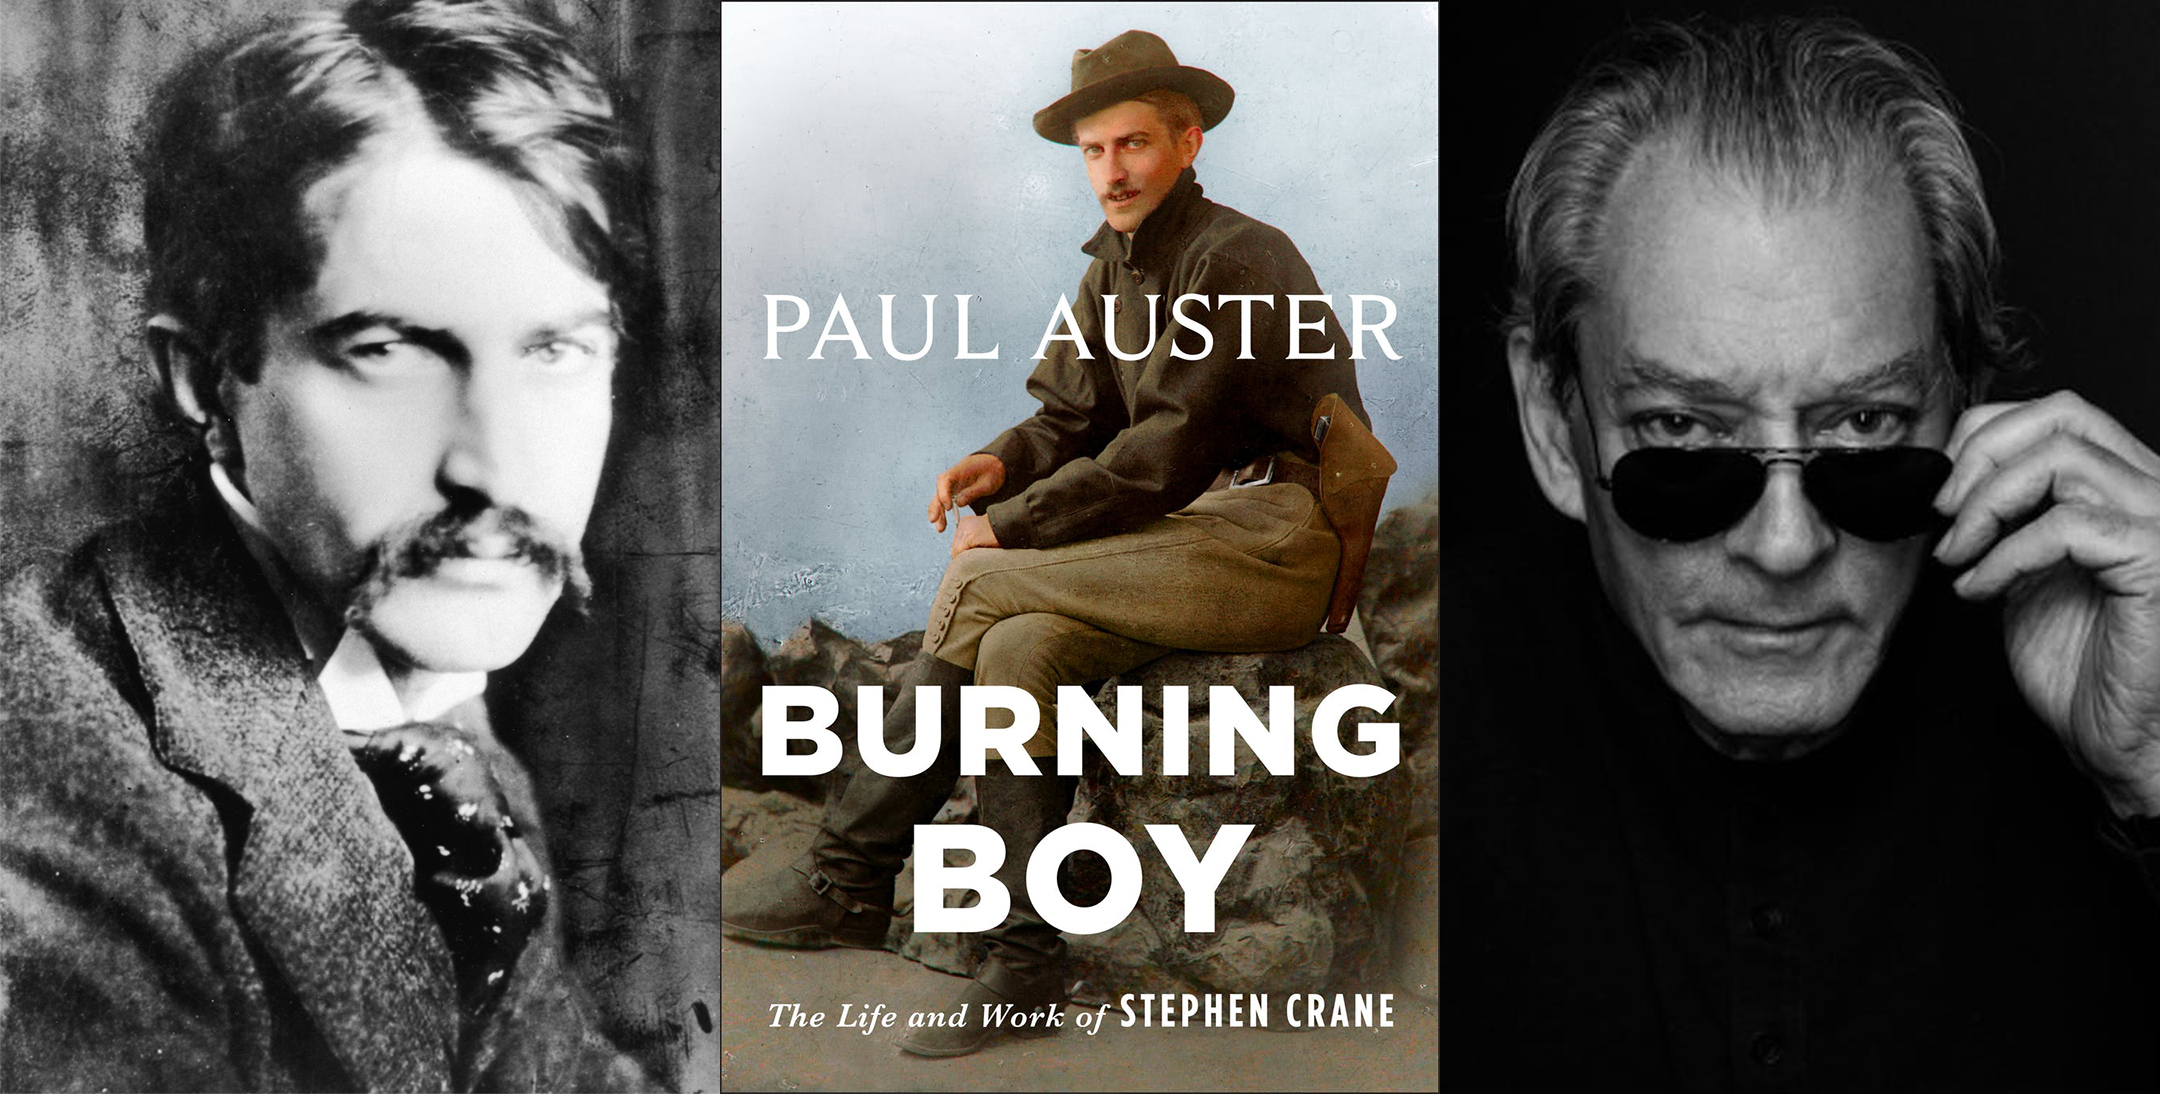 Portrait of American poet and writer Stephen Crane (left), cover of the book Burning Boy (center), portrait of author Paul Auster left